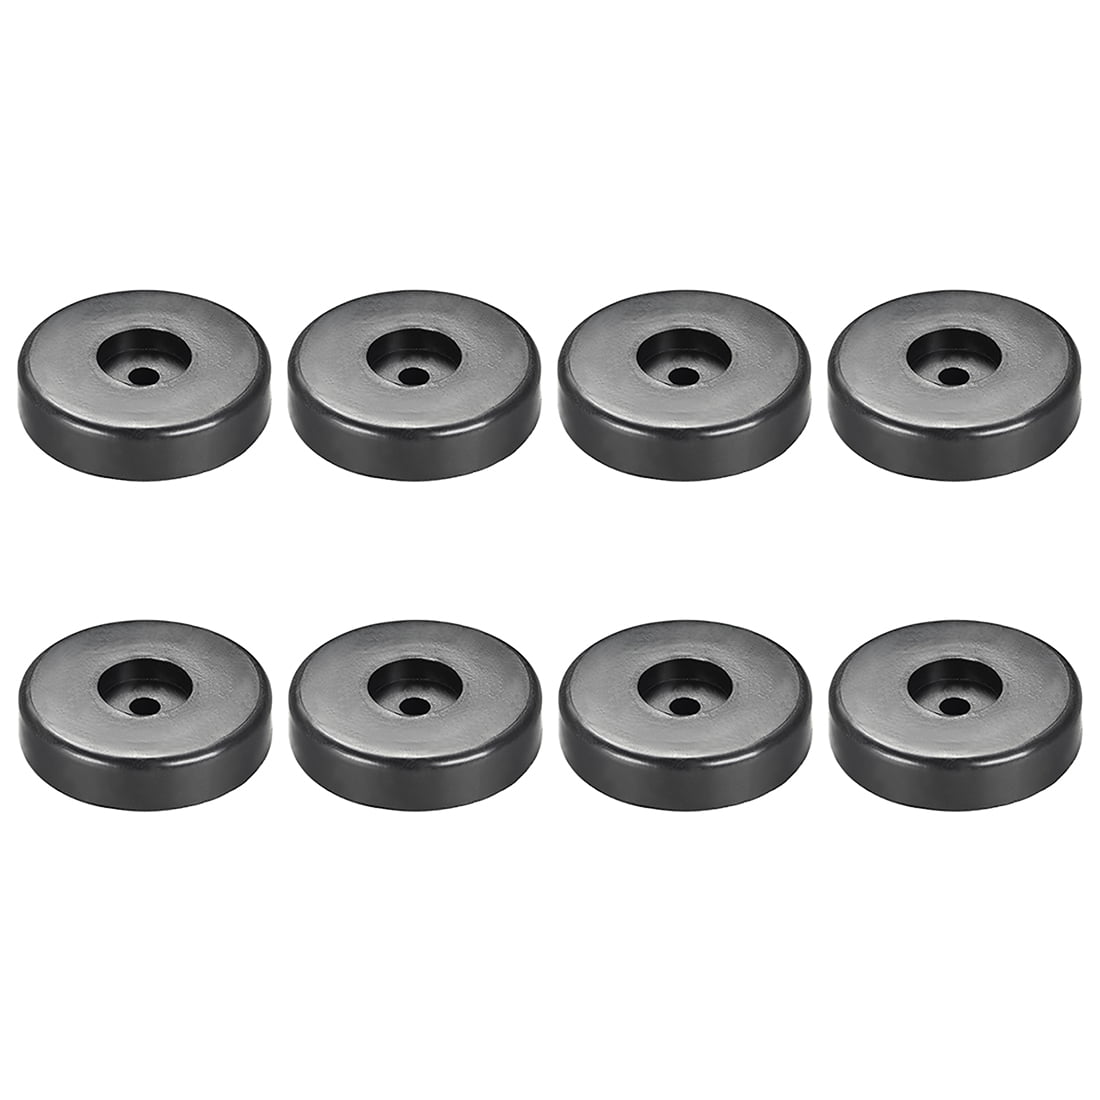 4 Pcs D40xH11mm Rubber Feet Anti-Vibration Base Pad Stand for Speaker Amplifier 